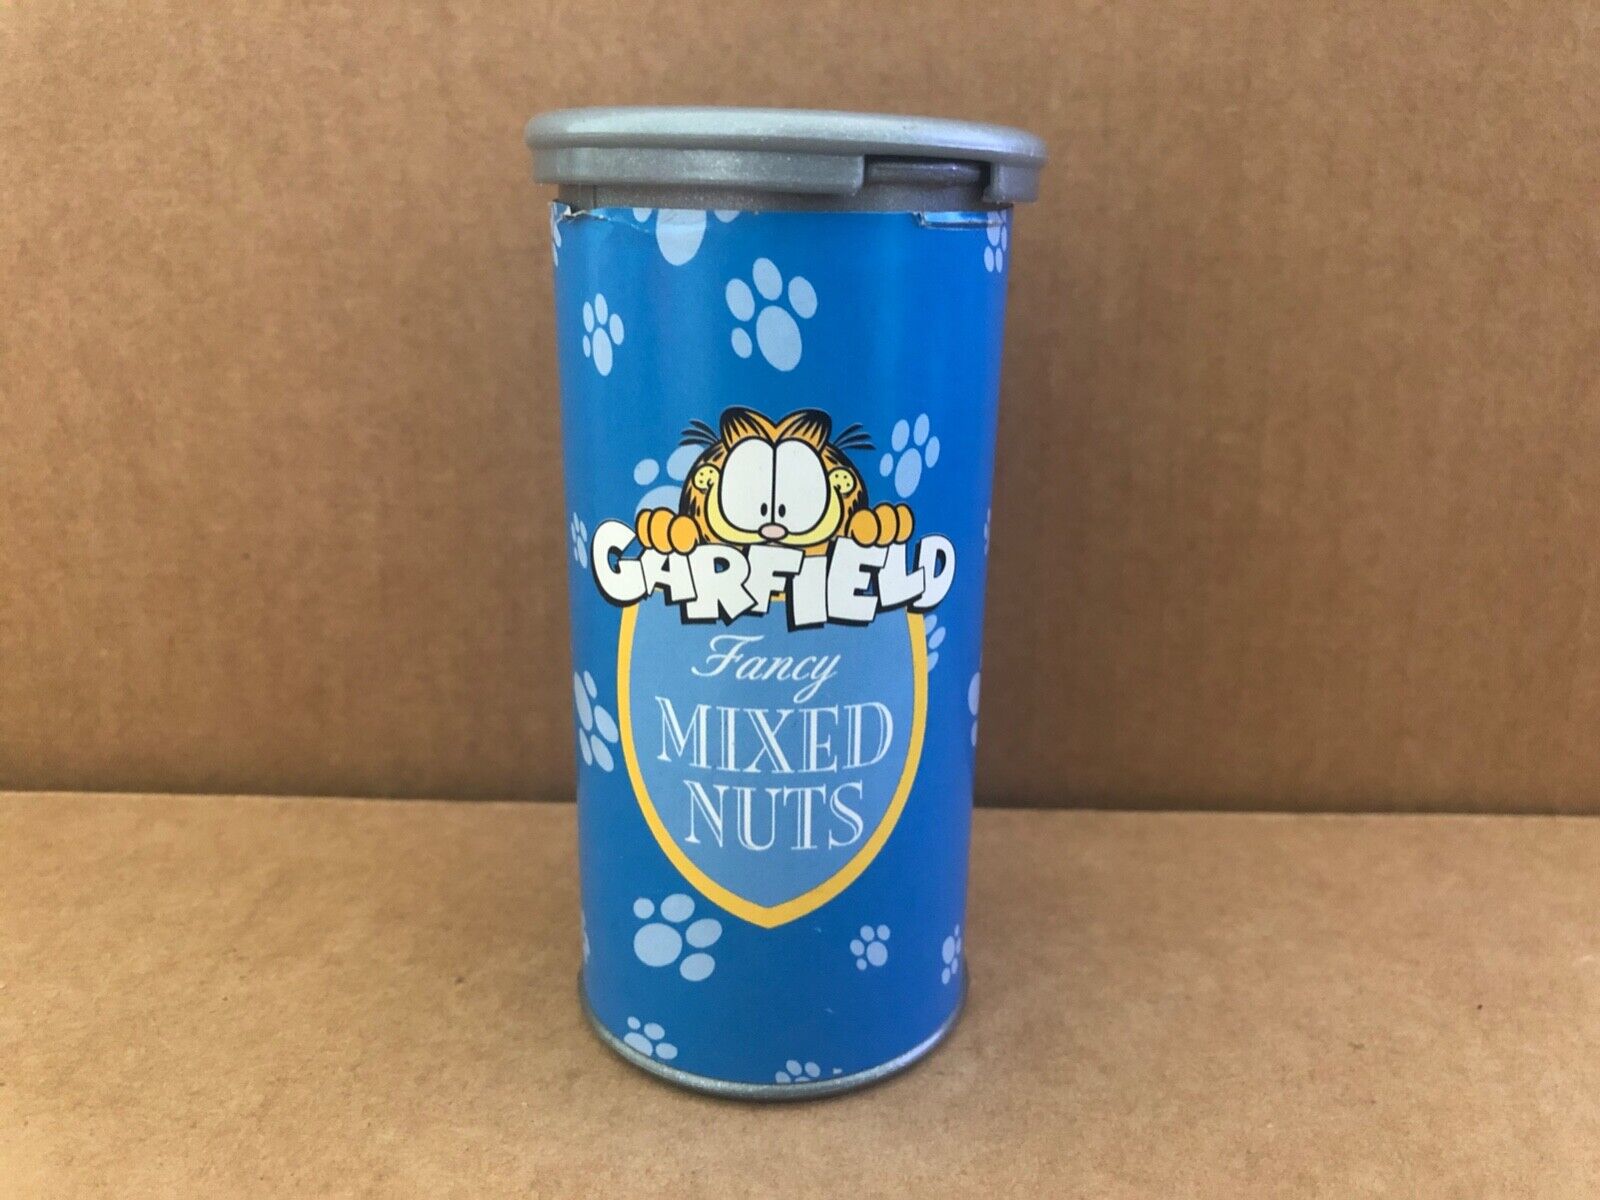 Sweet GARFIELD 2Fancy MIXED NUTS Can Gag Gift Toy Squeaks #9